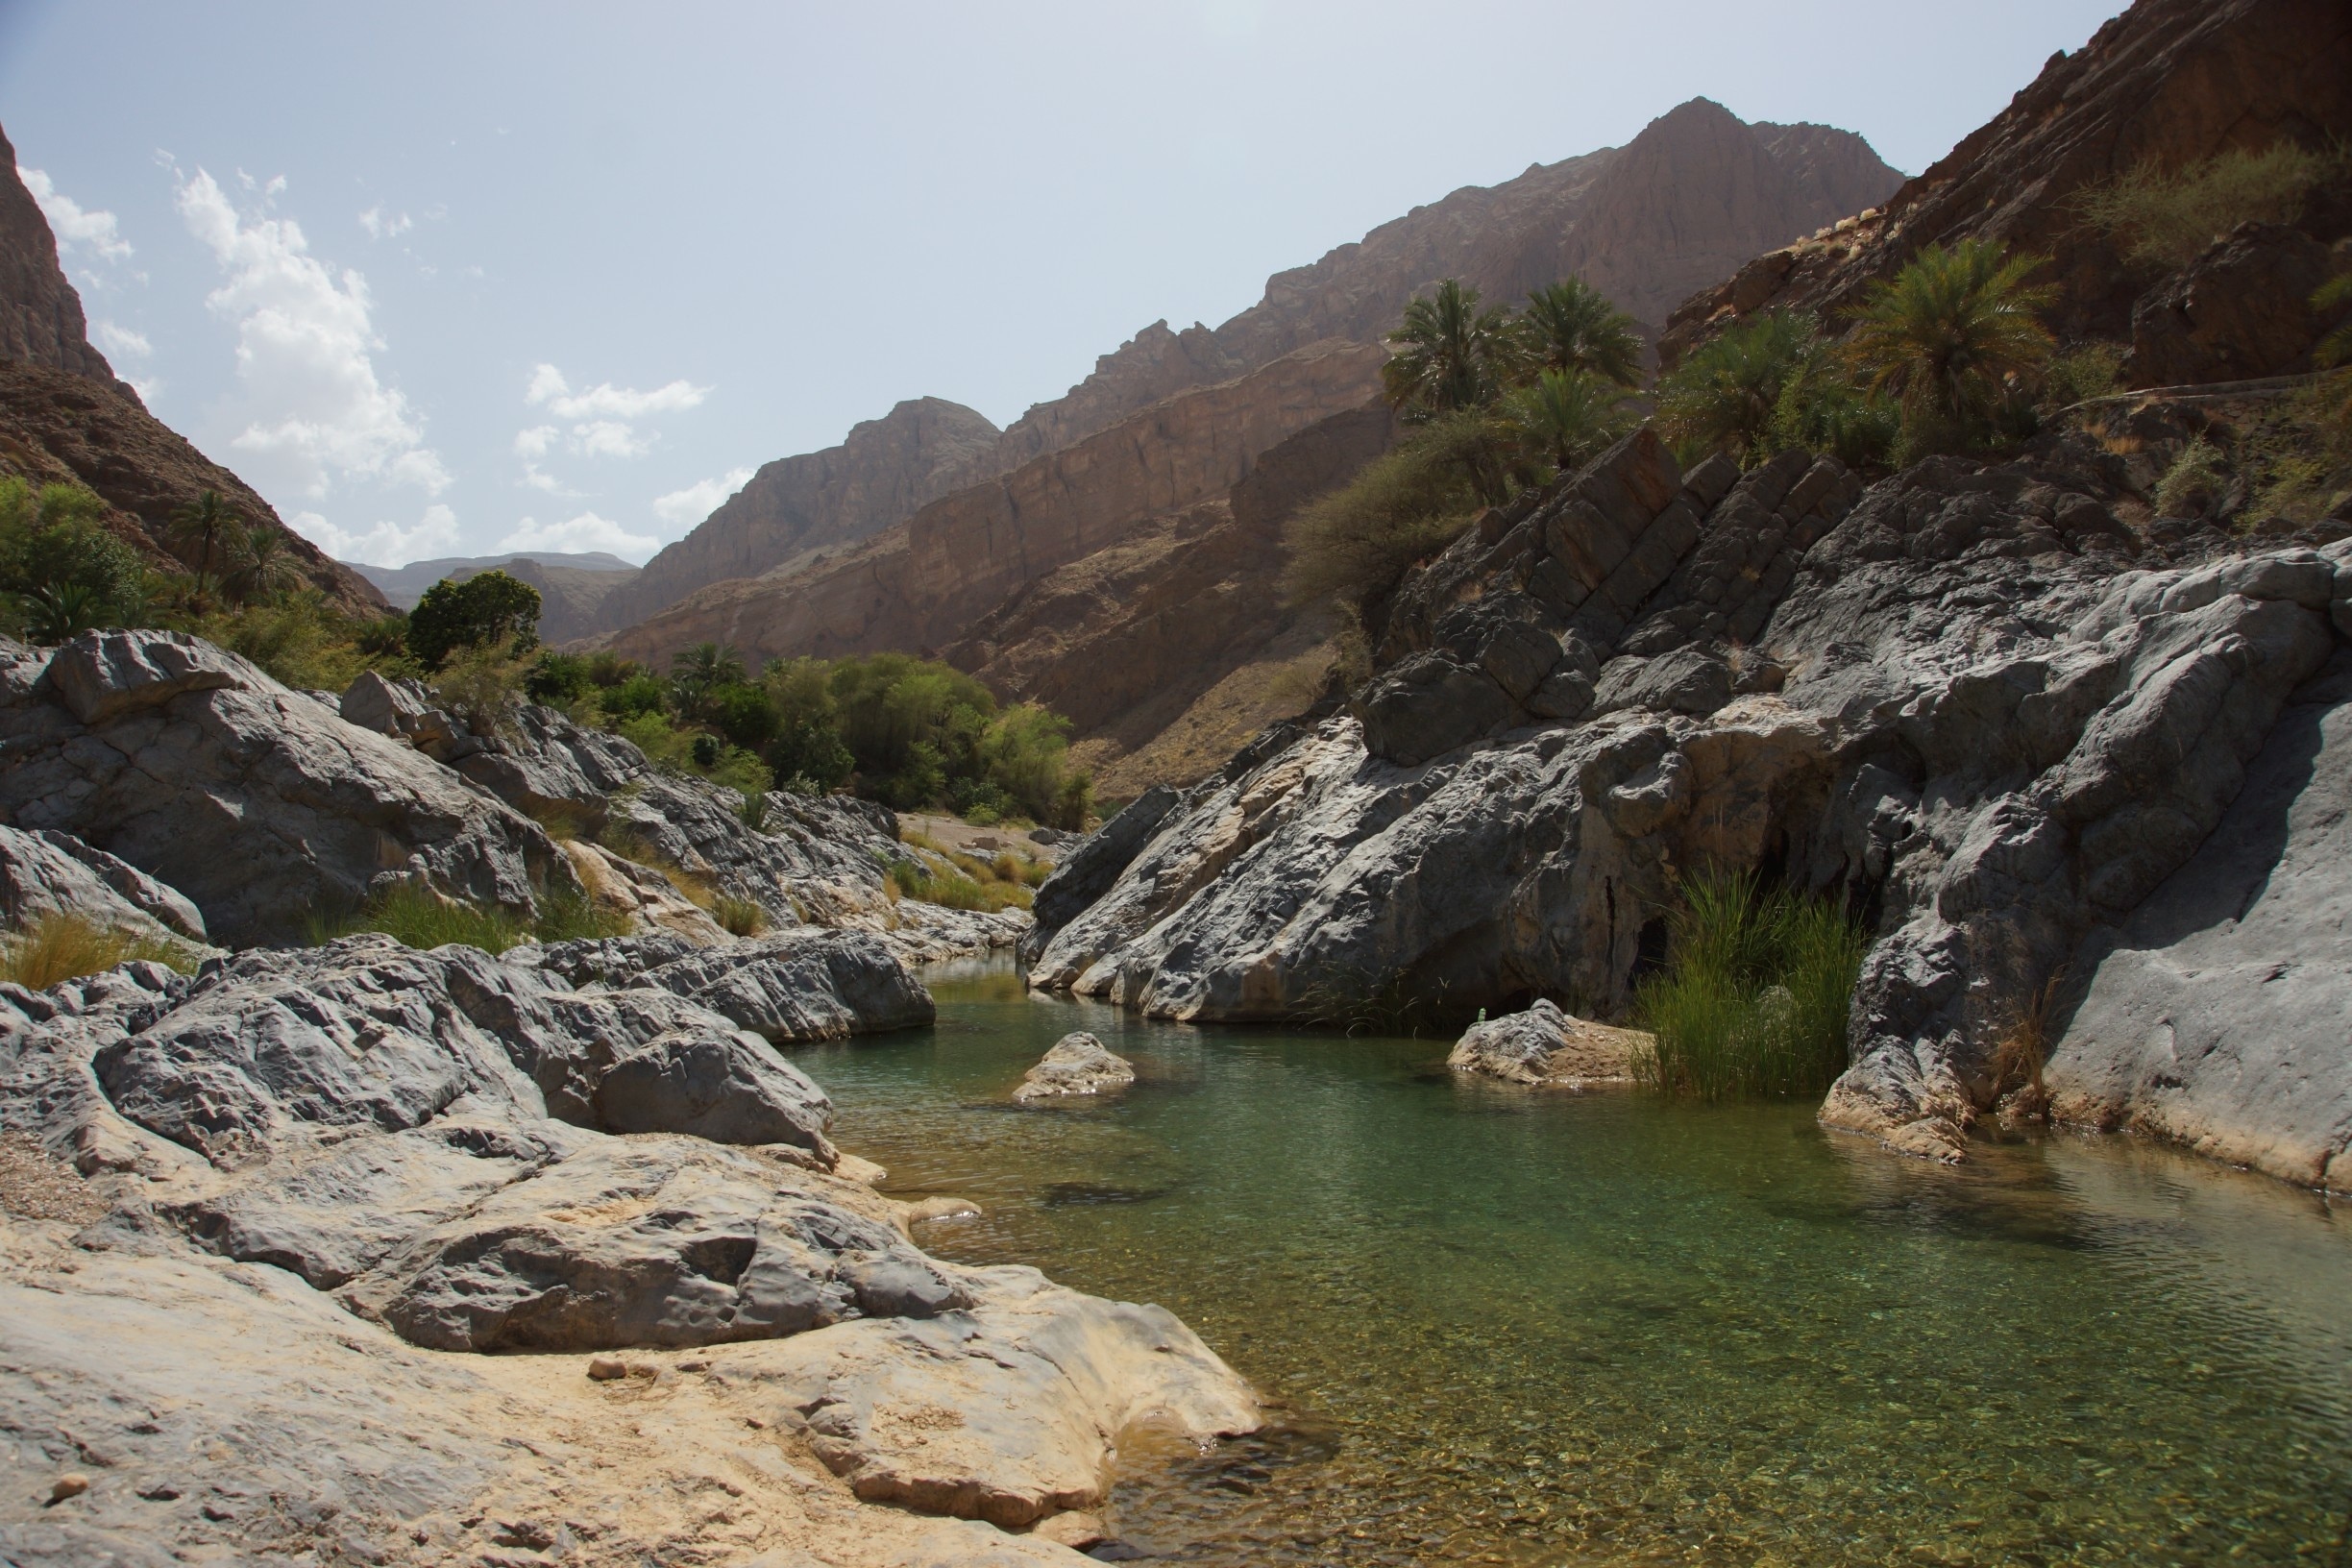 Further upstream, this doesn't look deep, but is at least 7 feet deep in the darker green parts.  A pair of old sand shoes or reef shoes and the ability to swim are needed for continuing up the wadi, but it is well worth the effort.